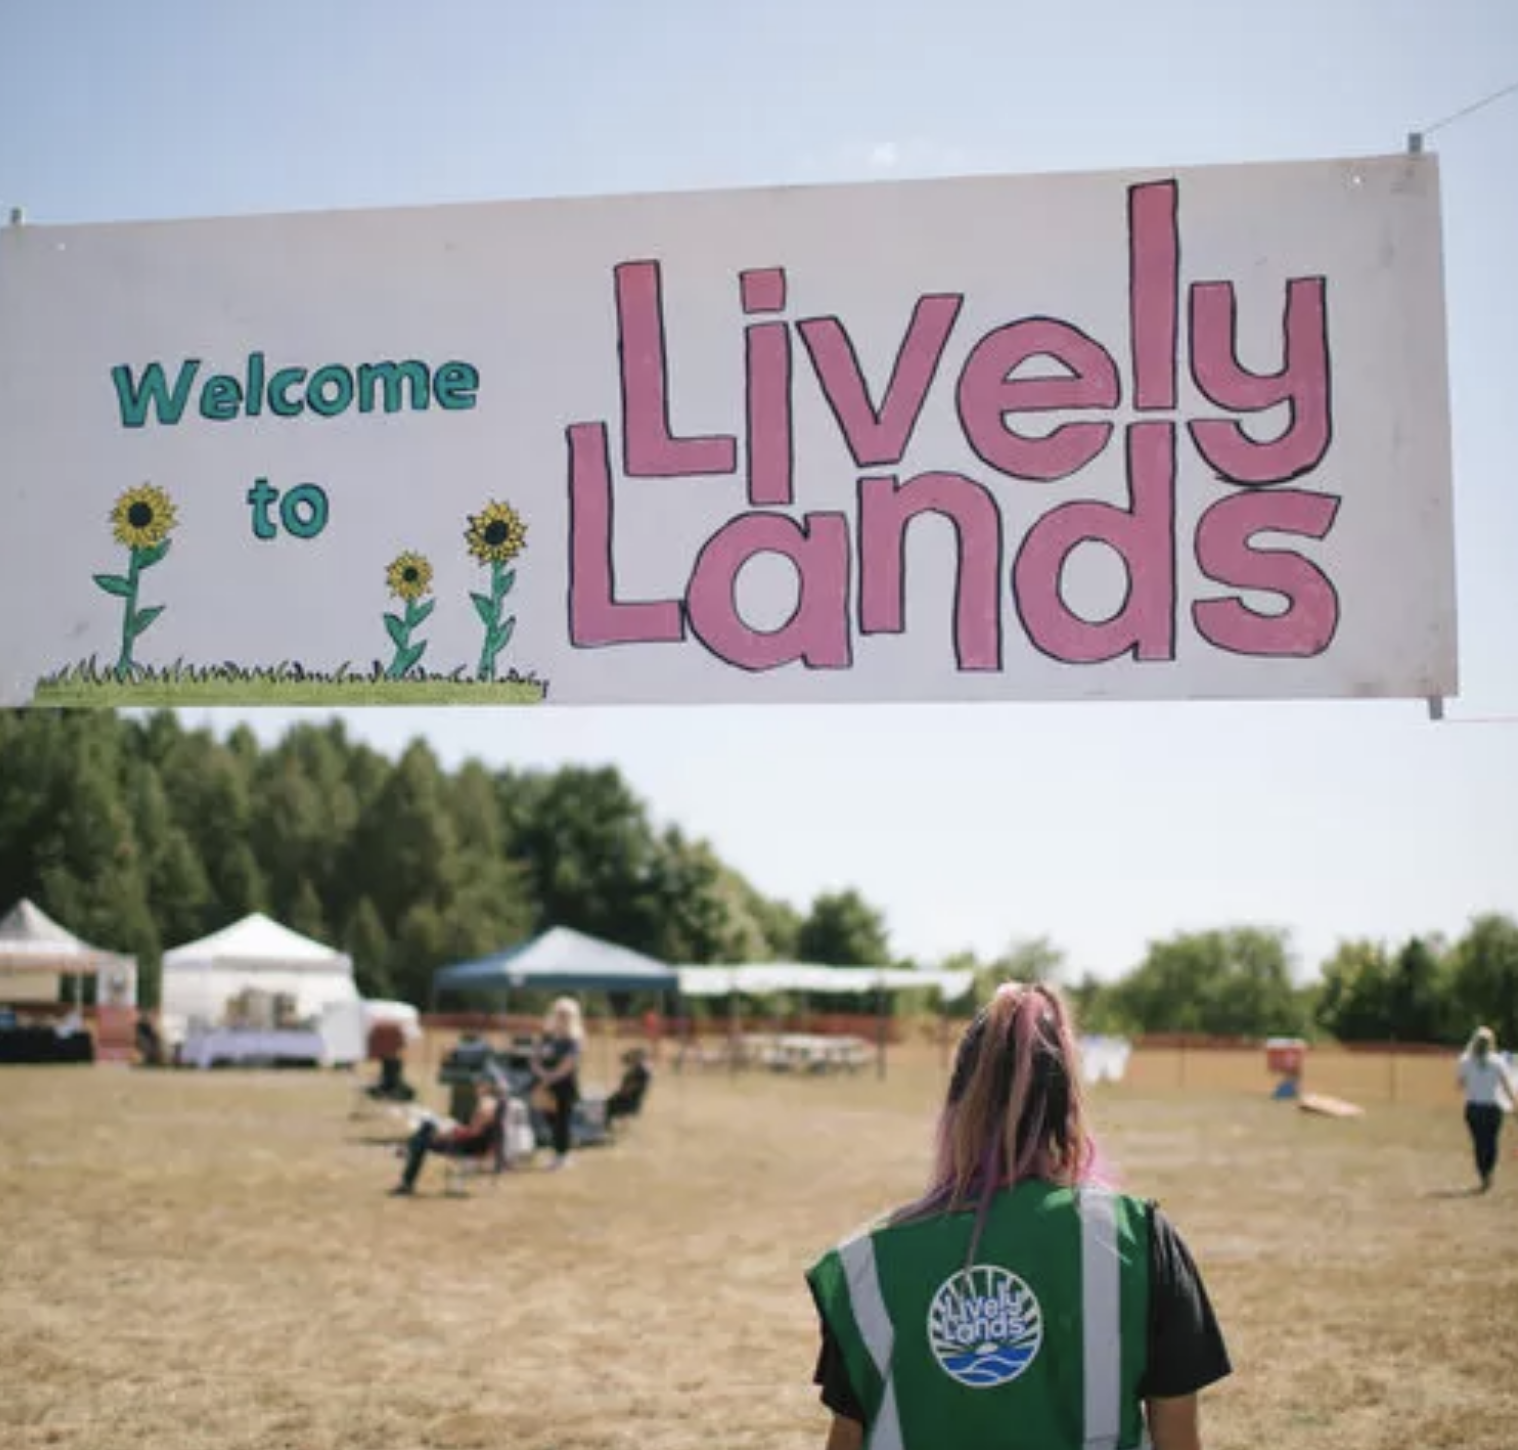 Lively Lands welcome sign at Backyard Burdickville